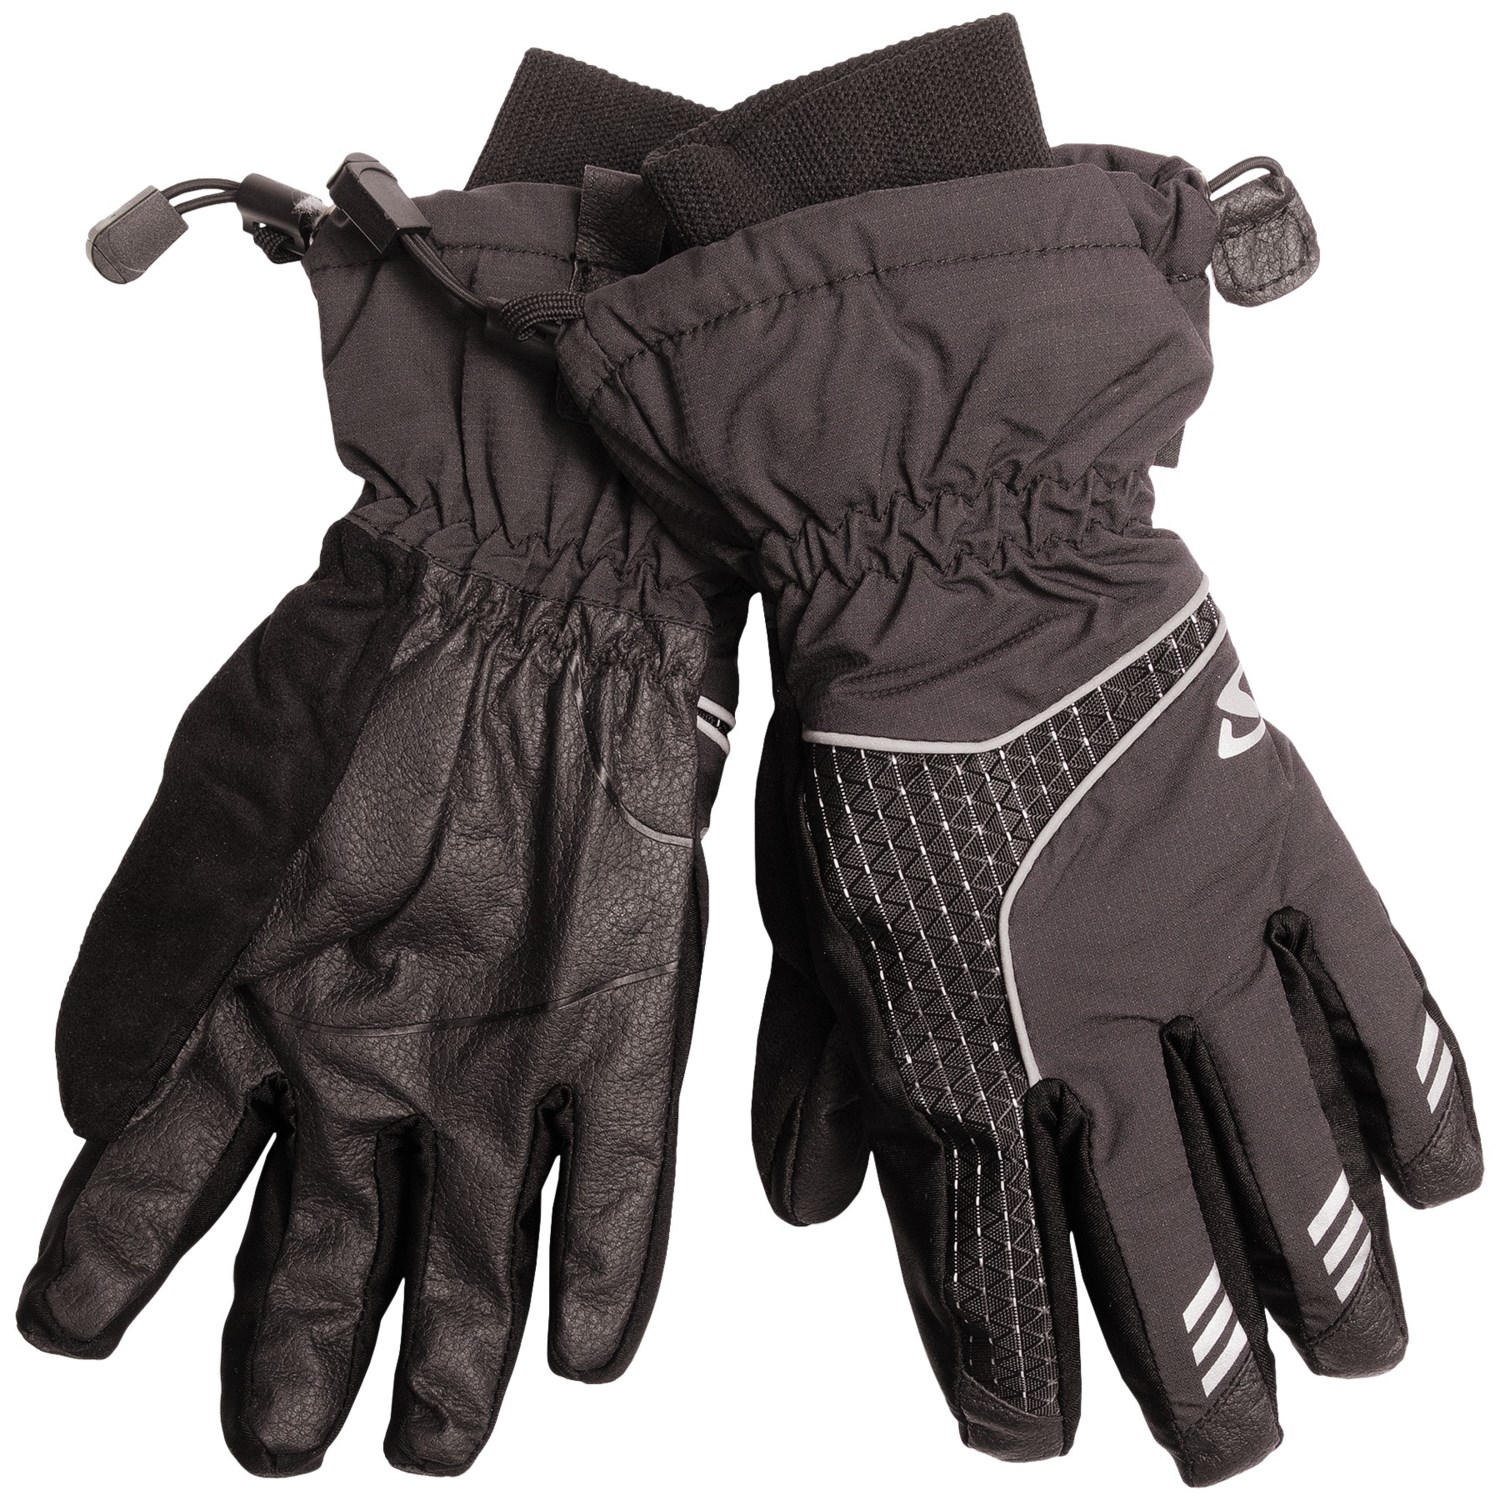 Giro Proof Winter Cycling Gloves (For Men) 8265P Save 66